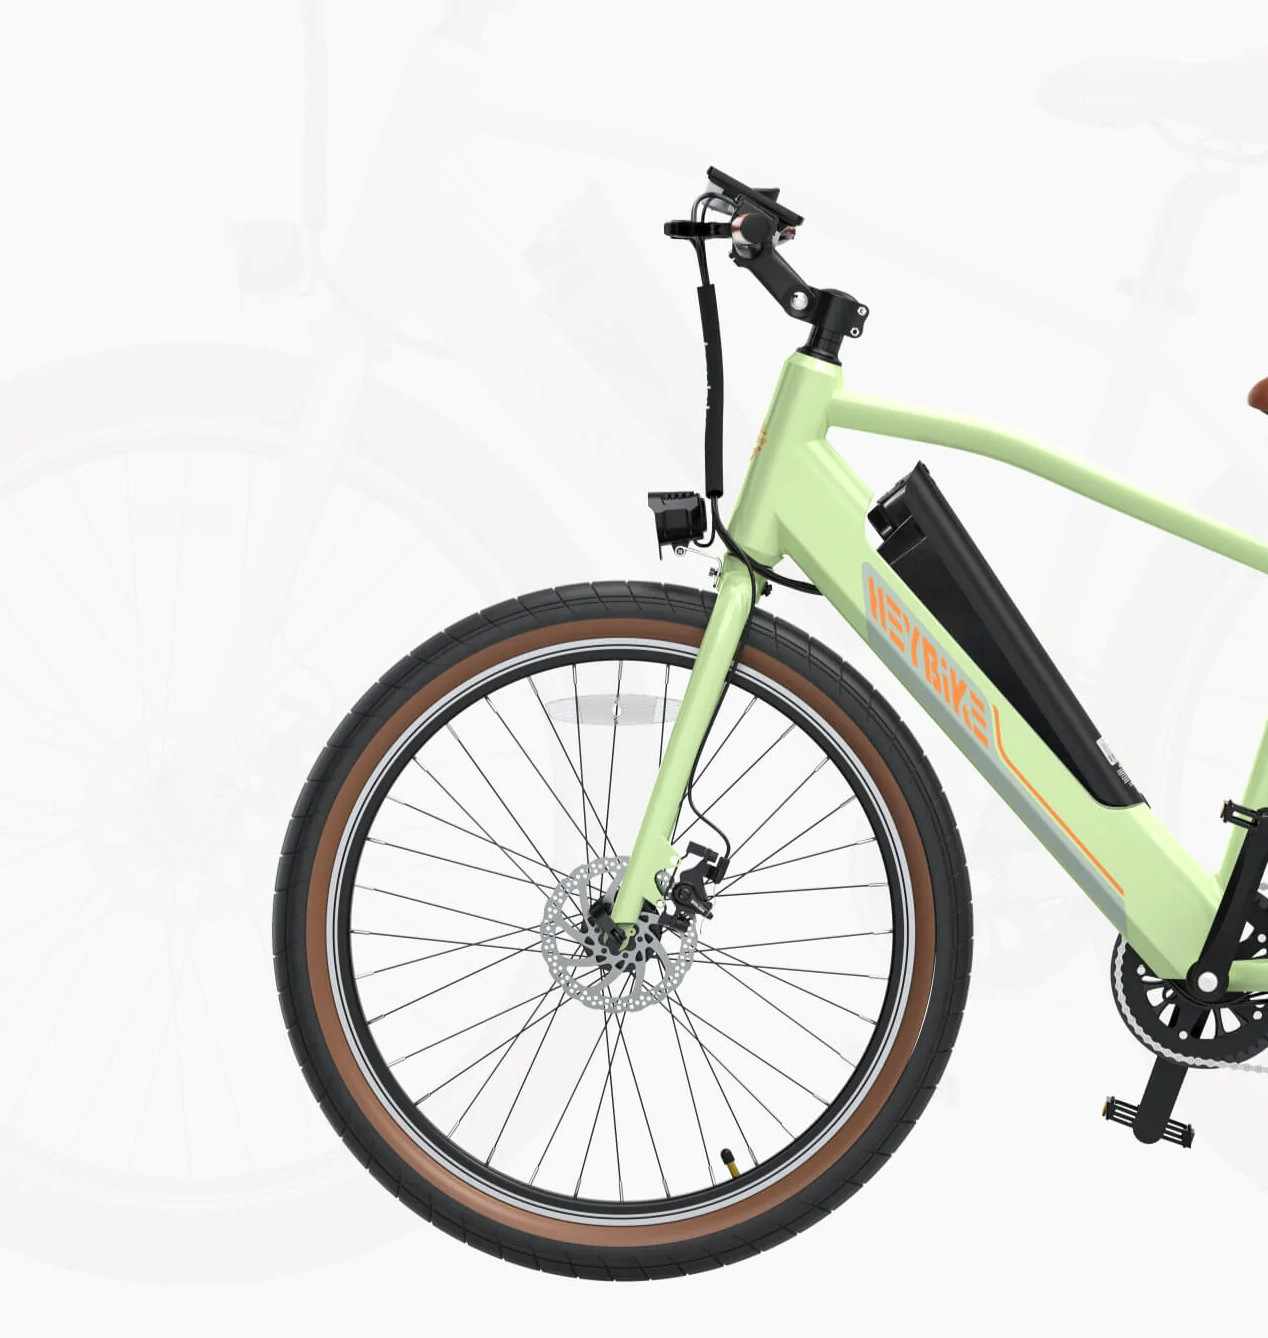 HeyBike Sola - Removable battery